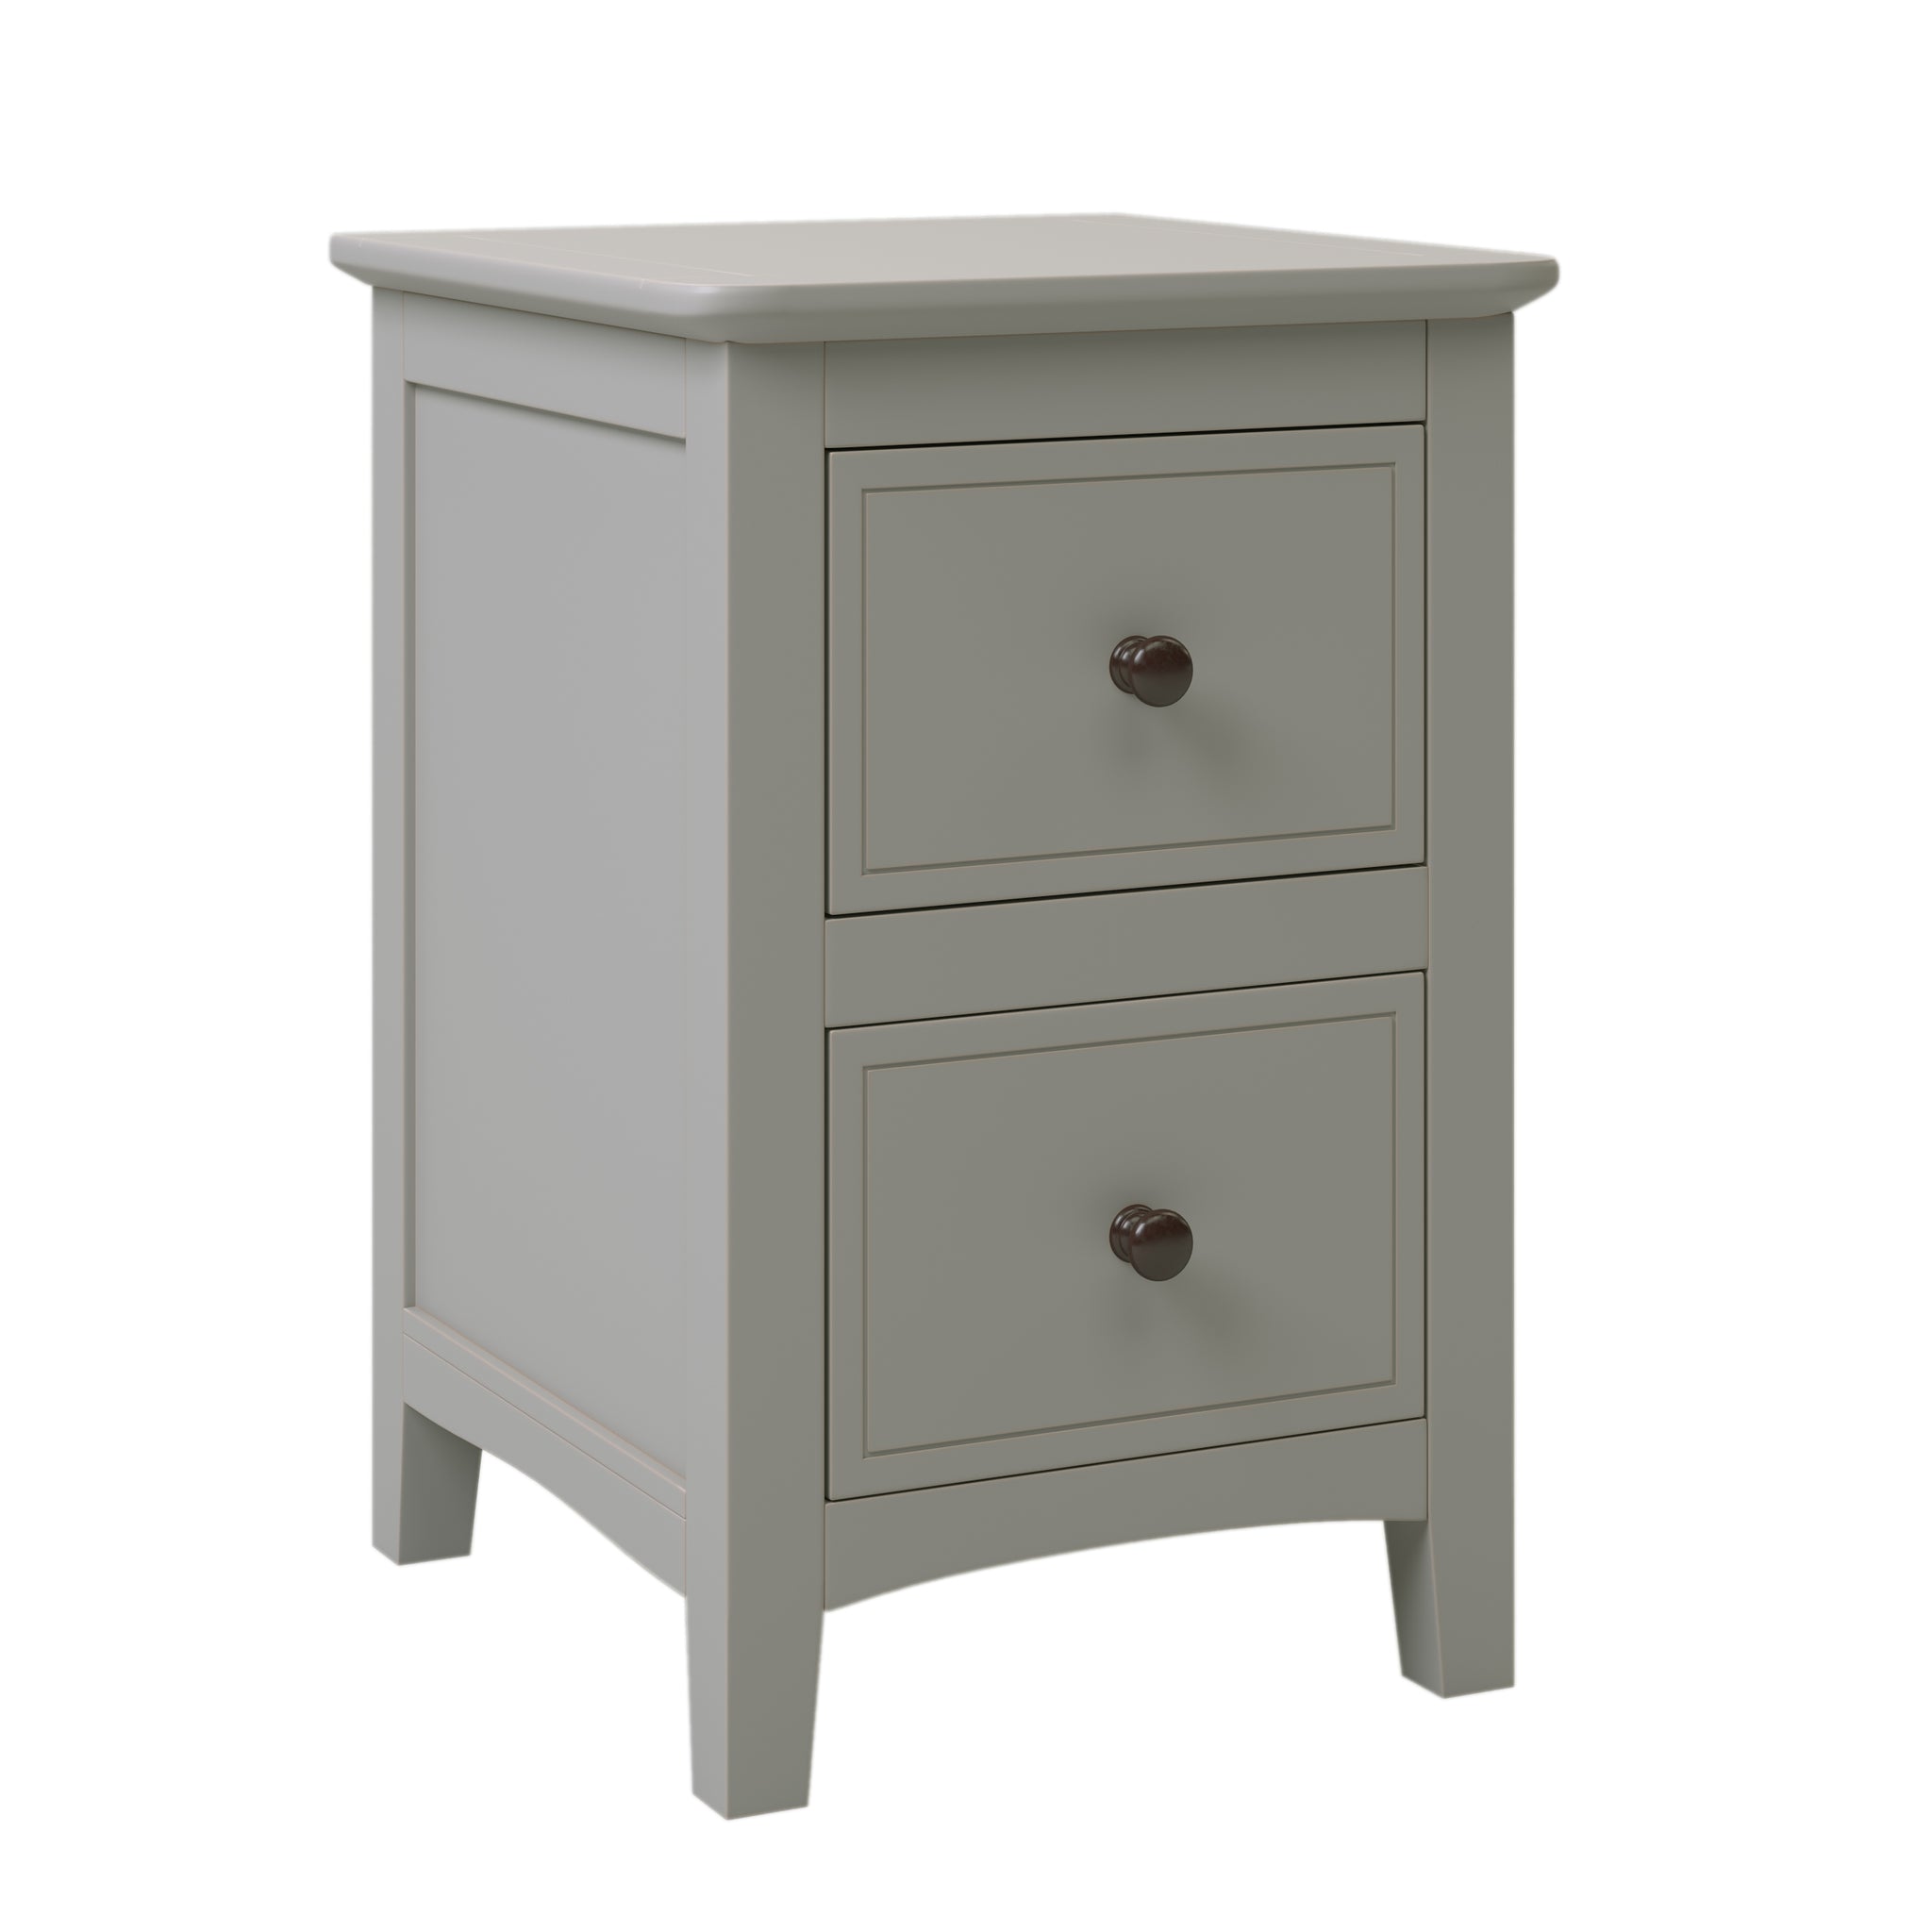 2 Drawers Solid Wood Nightstand End Table, Gray gray-solid wood